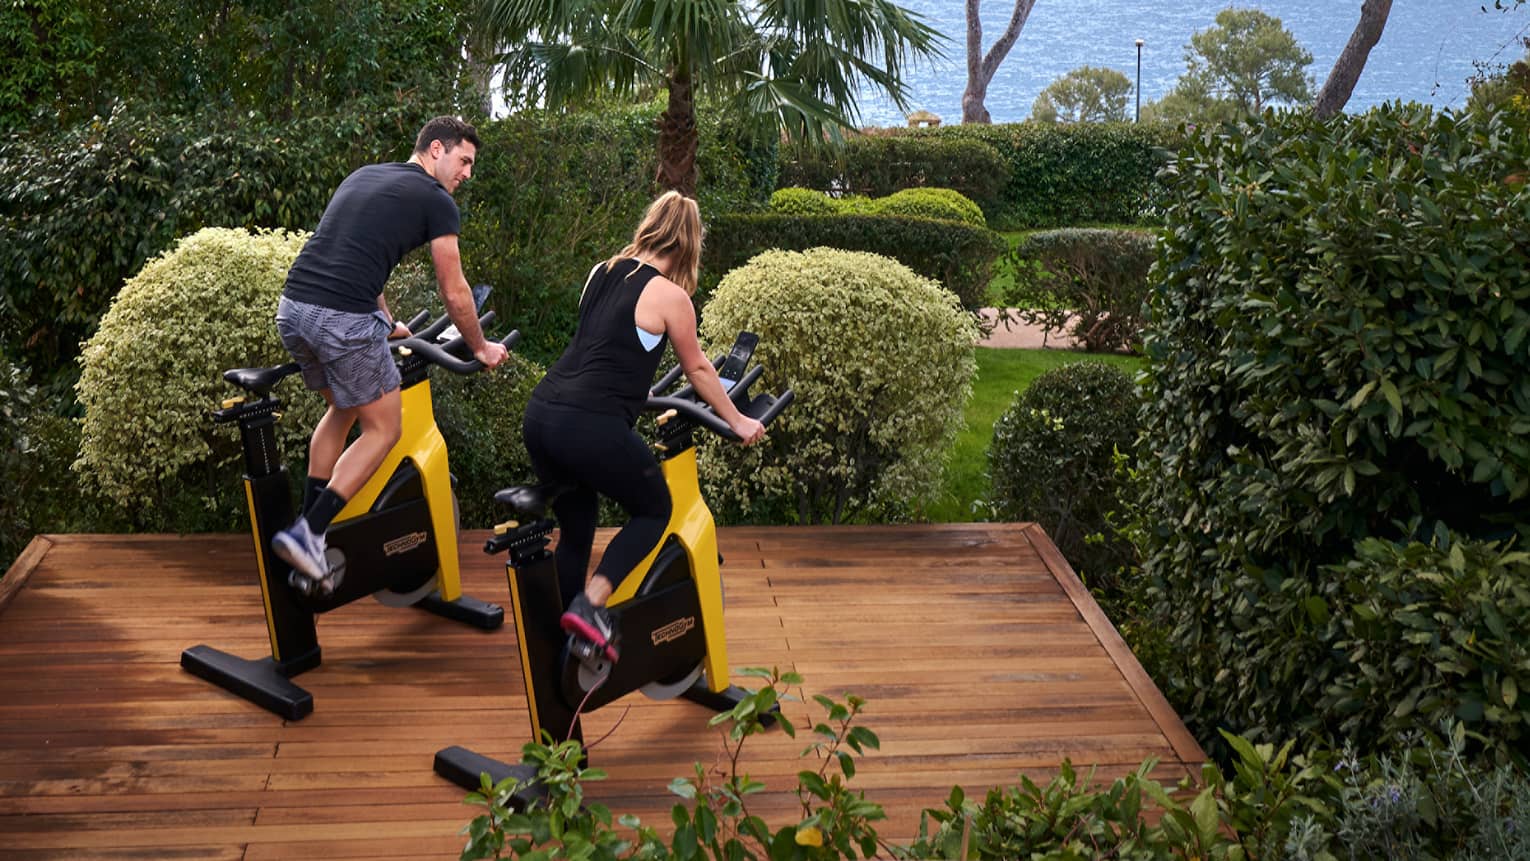 A man and a woman ride stationary bikes on outdoor wooden platform, sea in the distance